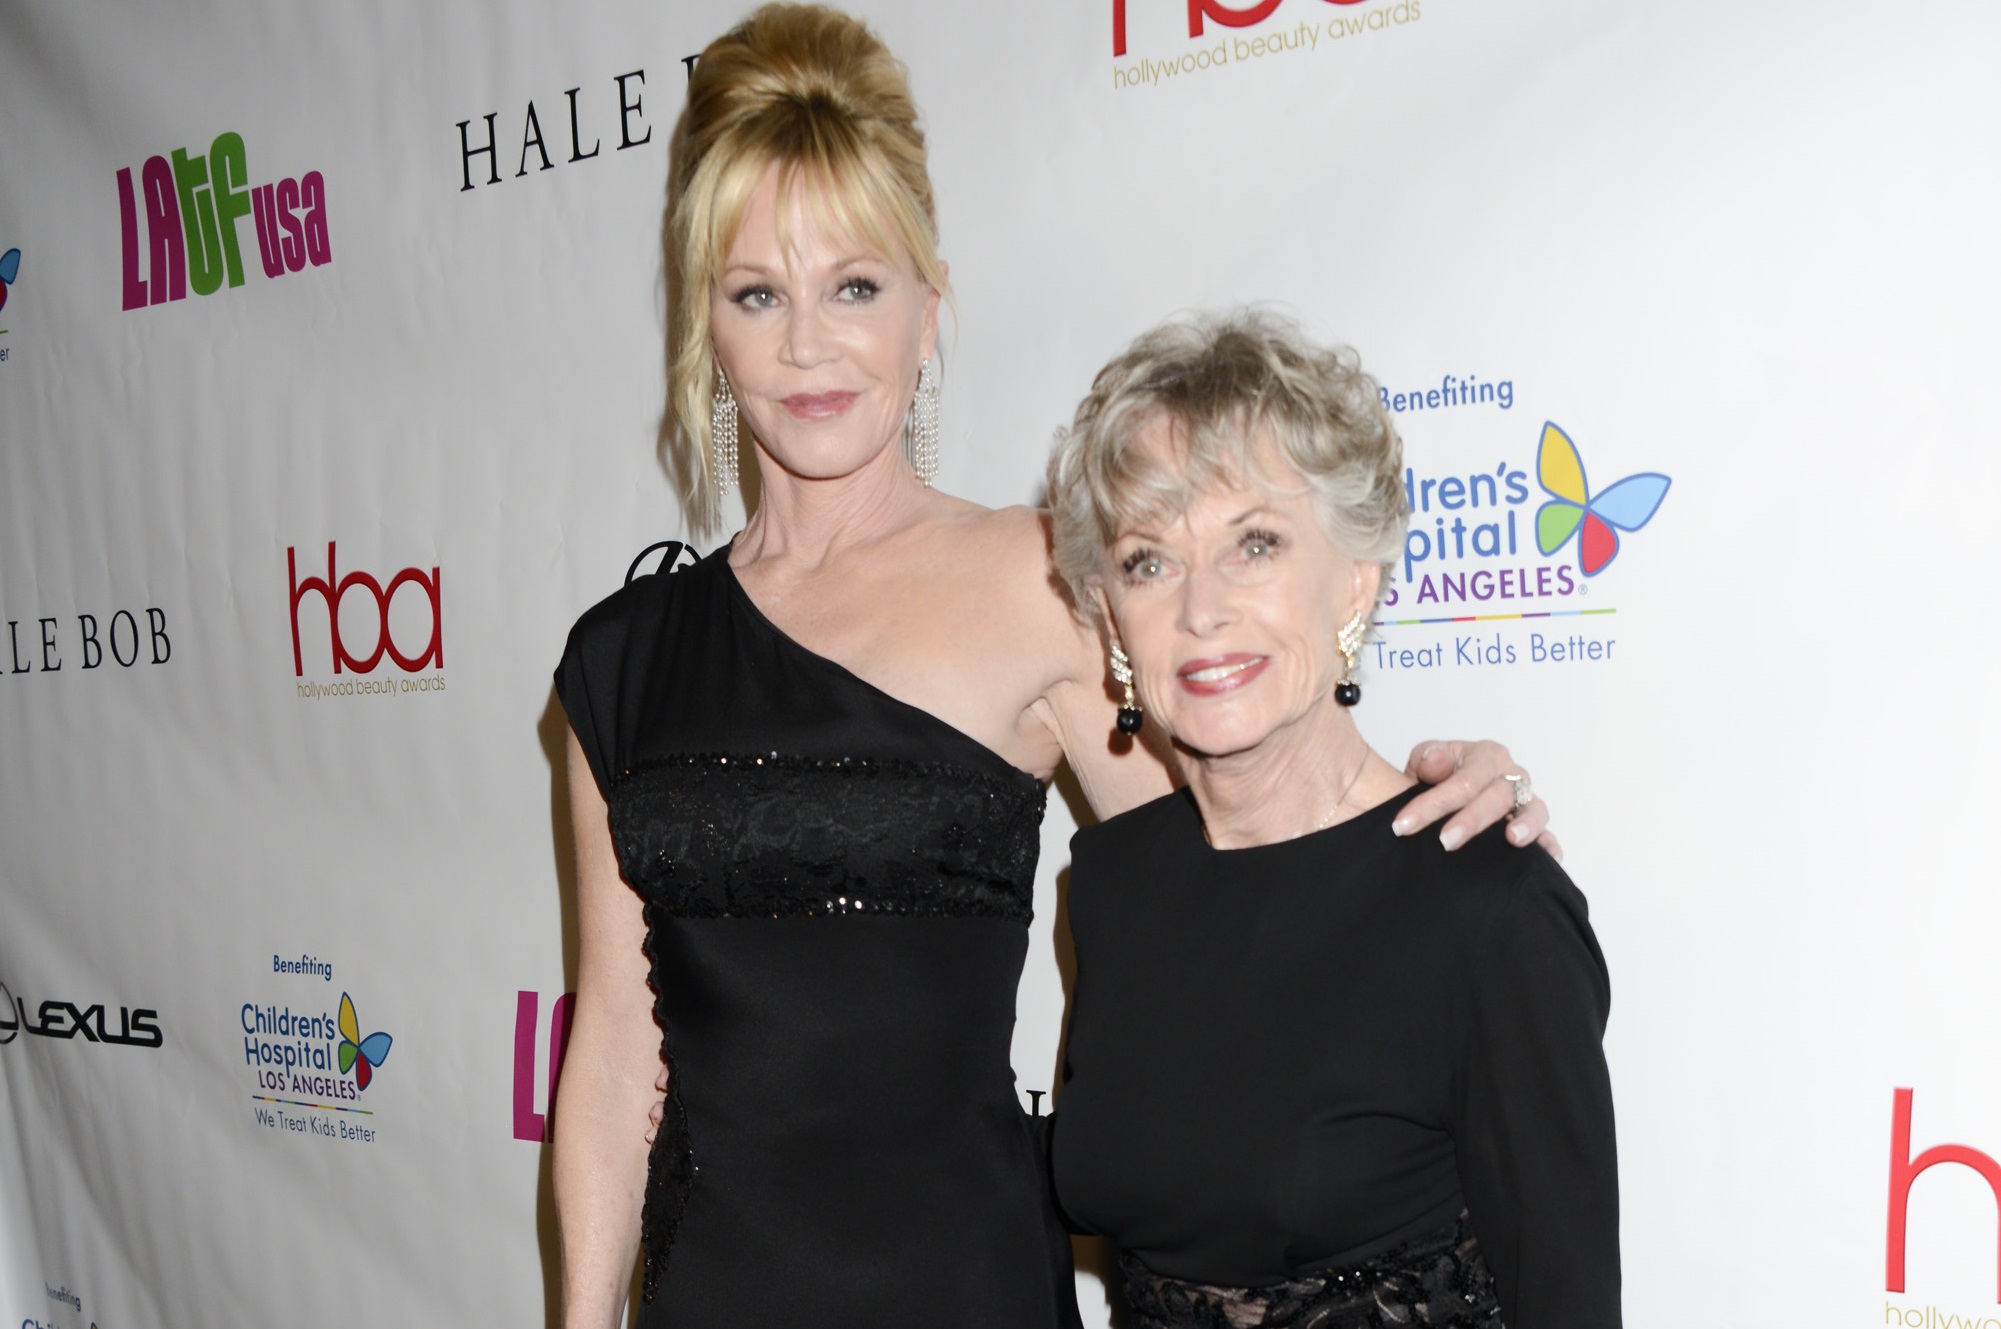 Melanie Griffith and Tippi Hedren at Hollywood Beauty Awards - 2016